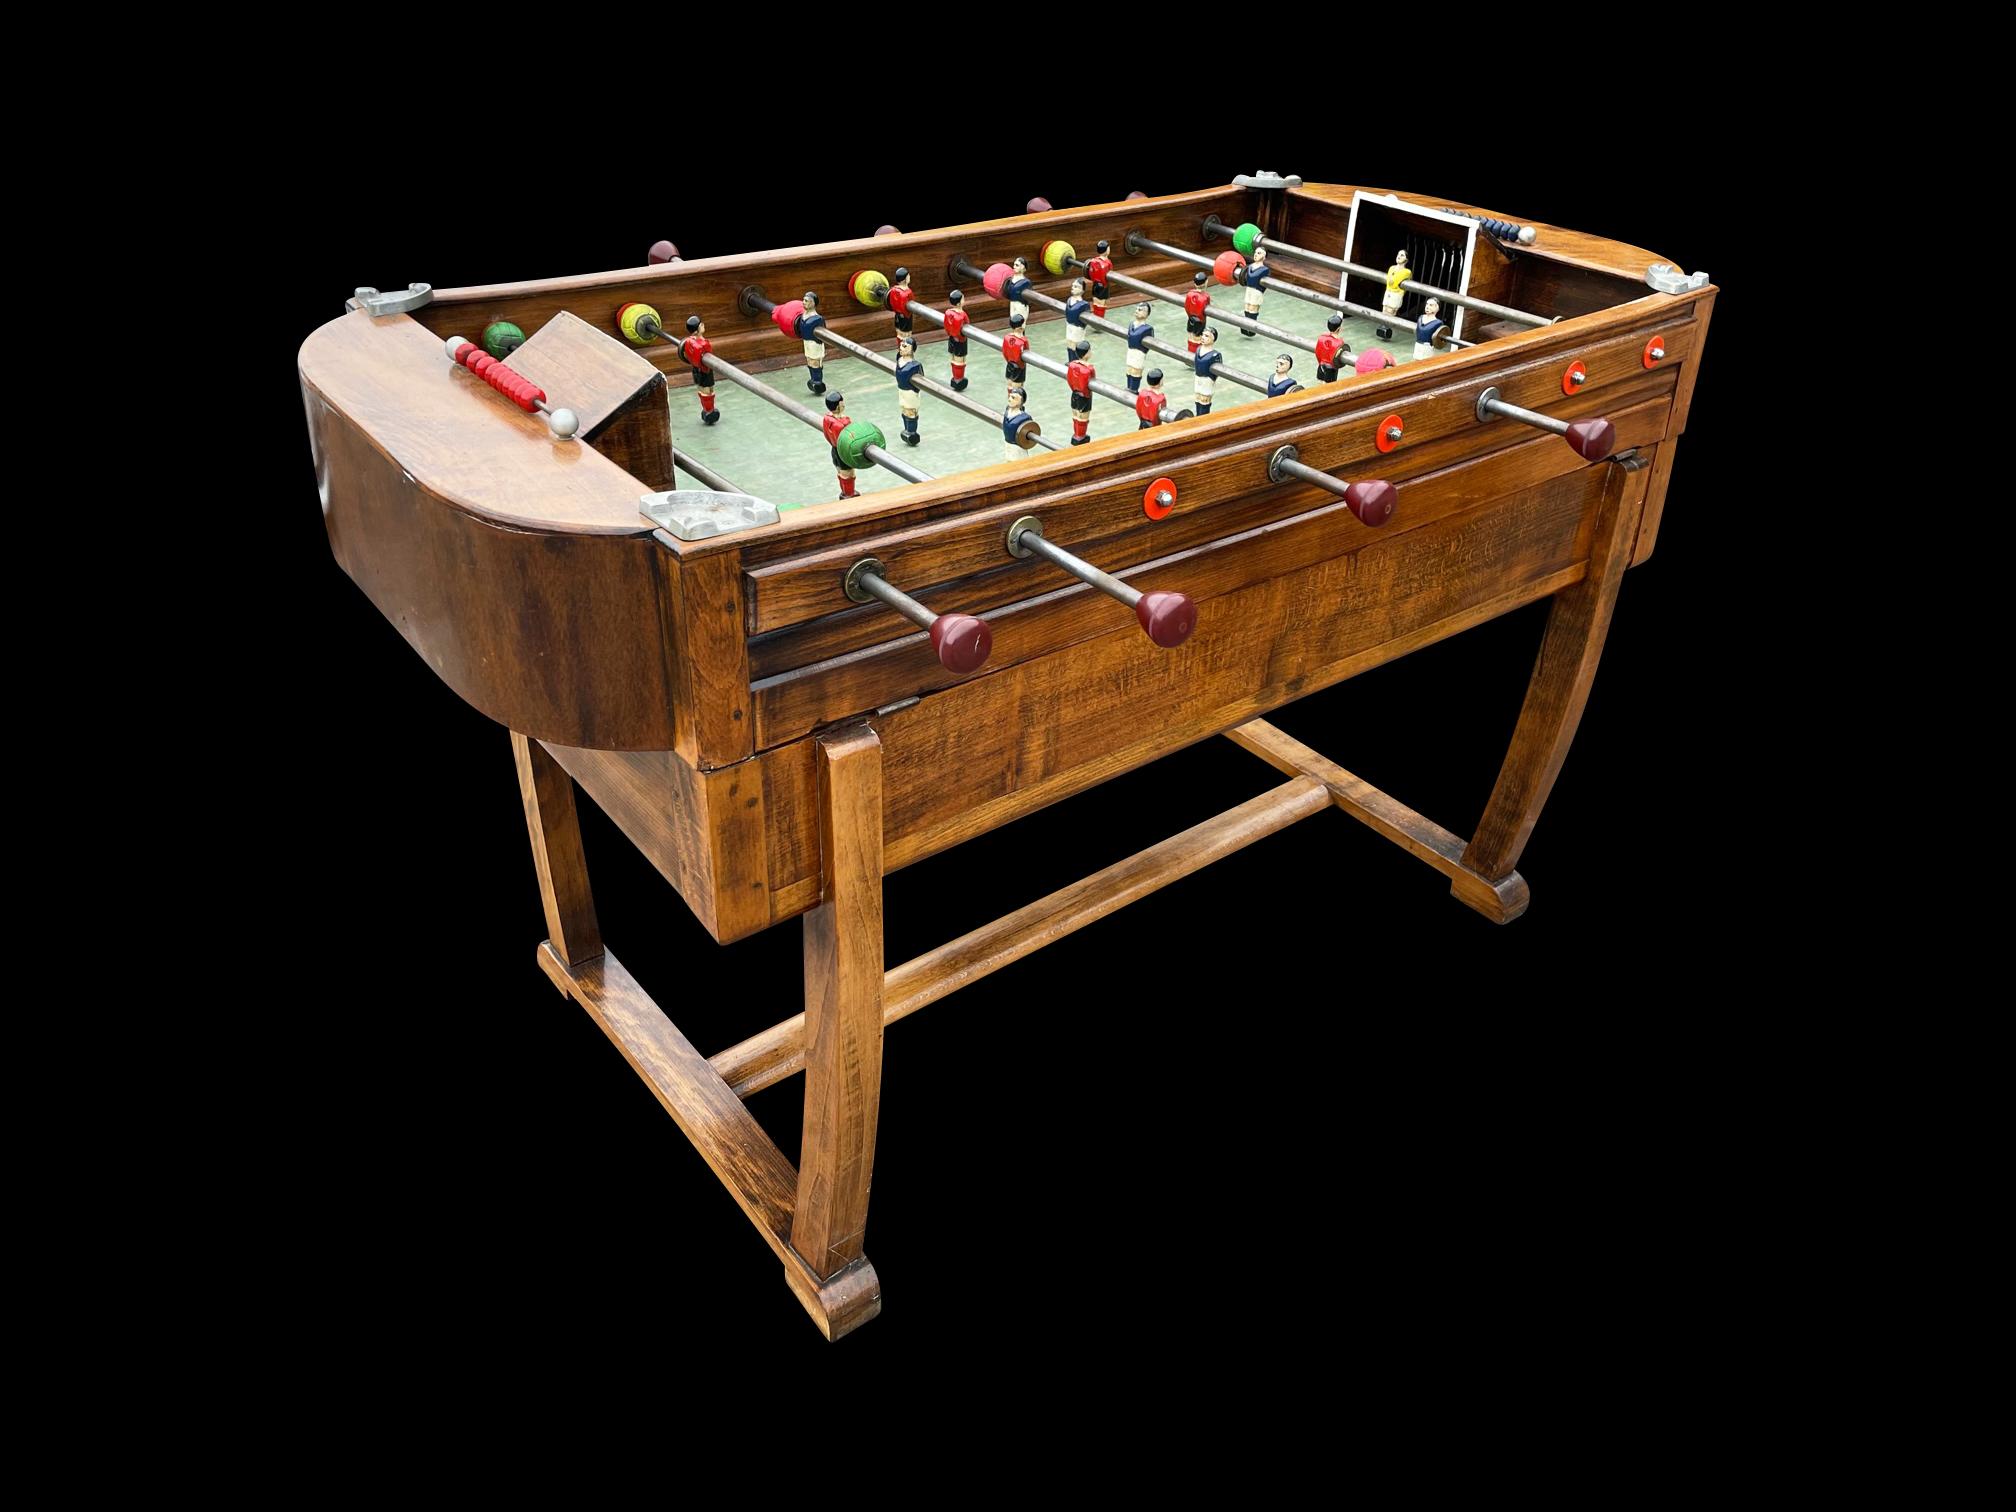 A lovely early French Football table, in unrestored condition. This table is a rare find, a truly lovely piece that would look fantastic in either an office or a games room, or in any room to be honest 

The players in their original paint, complete